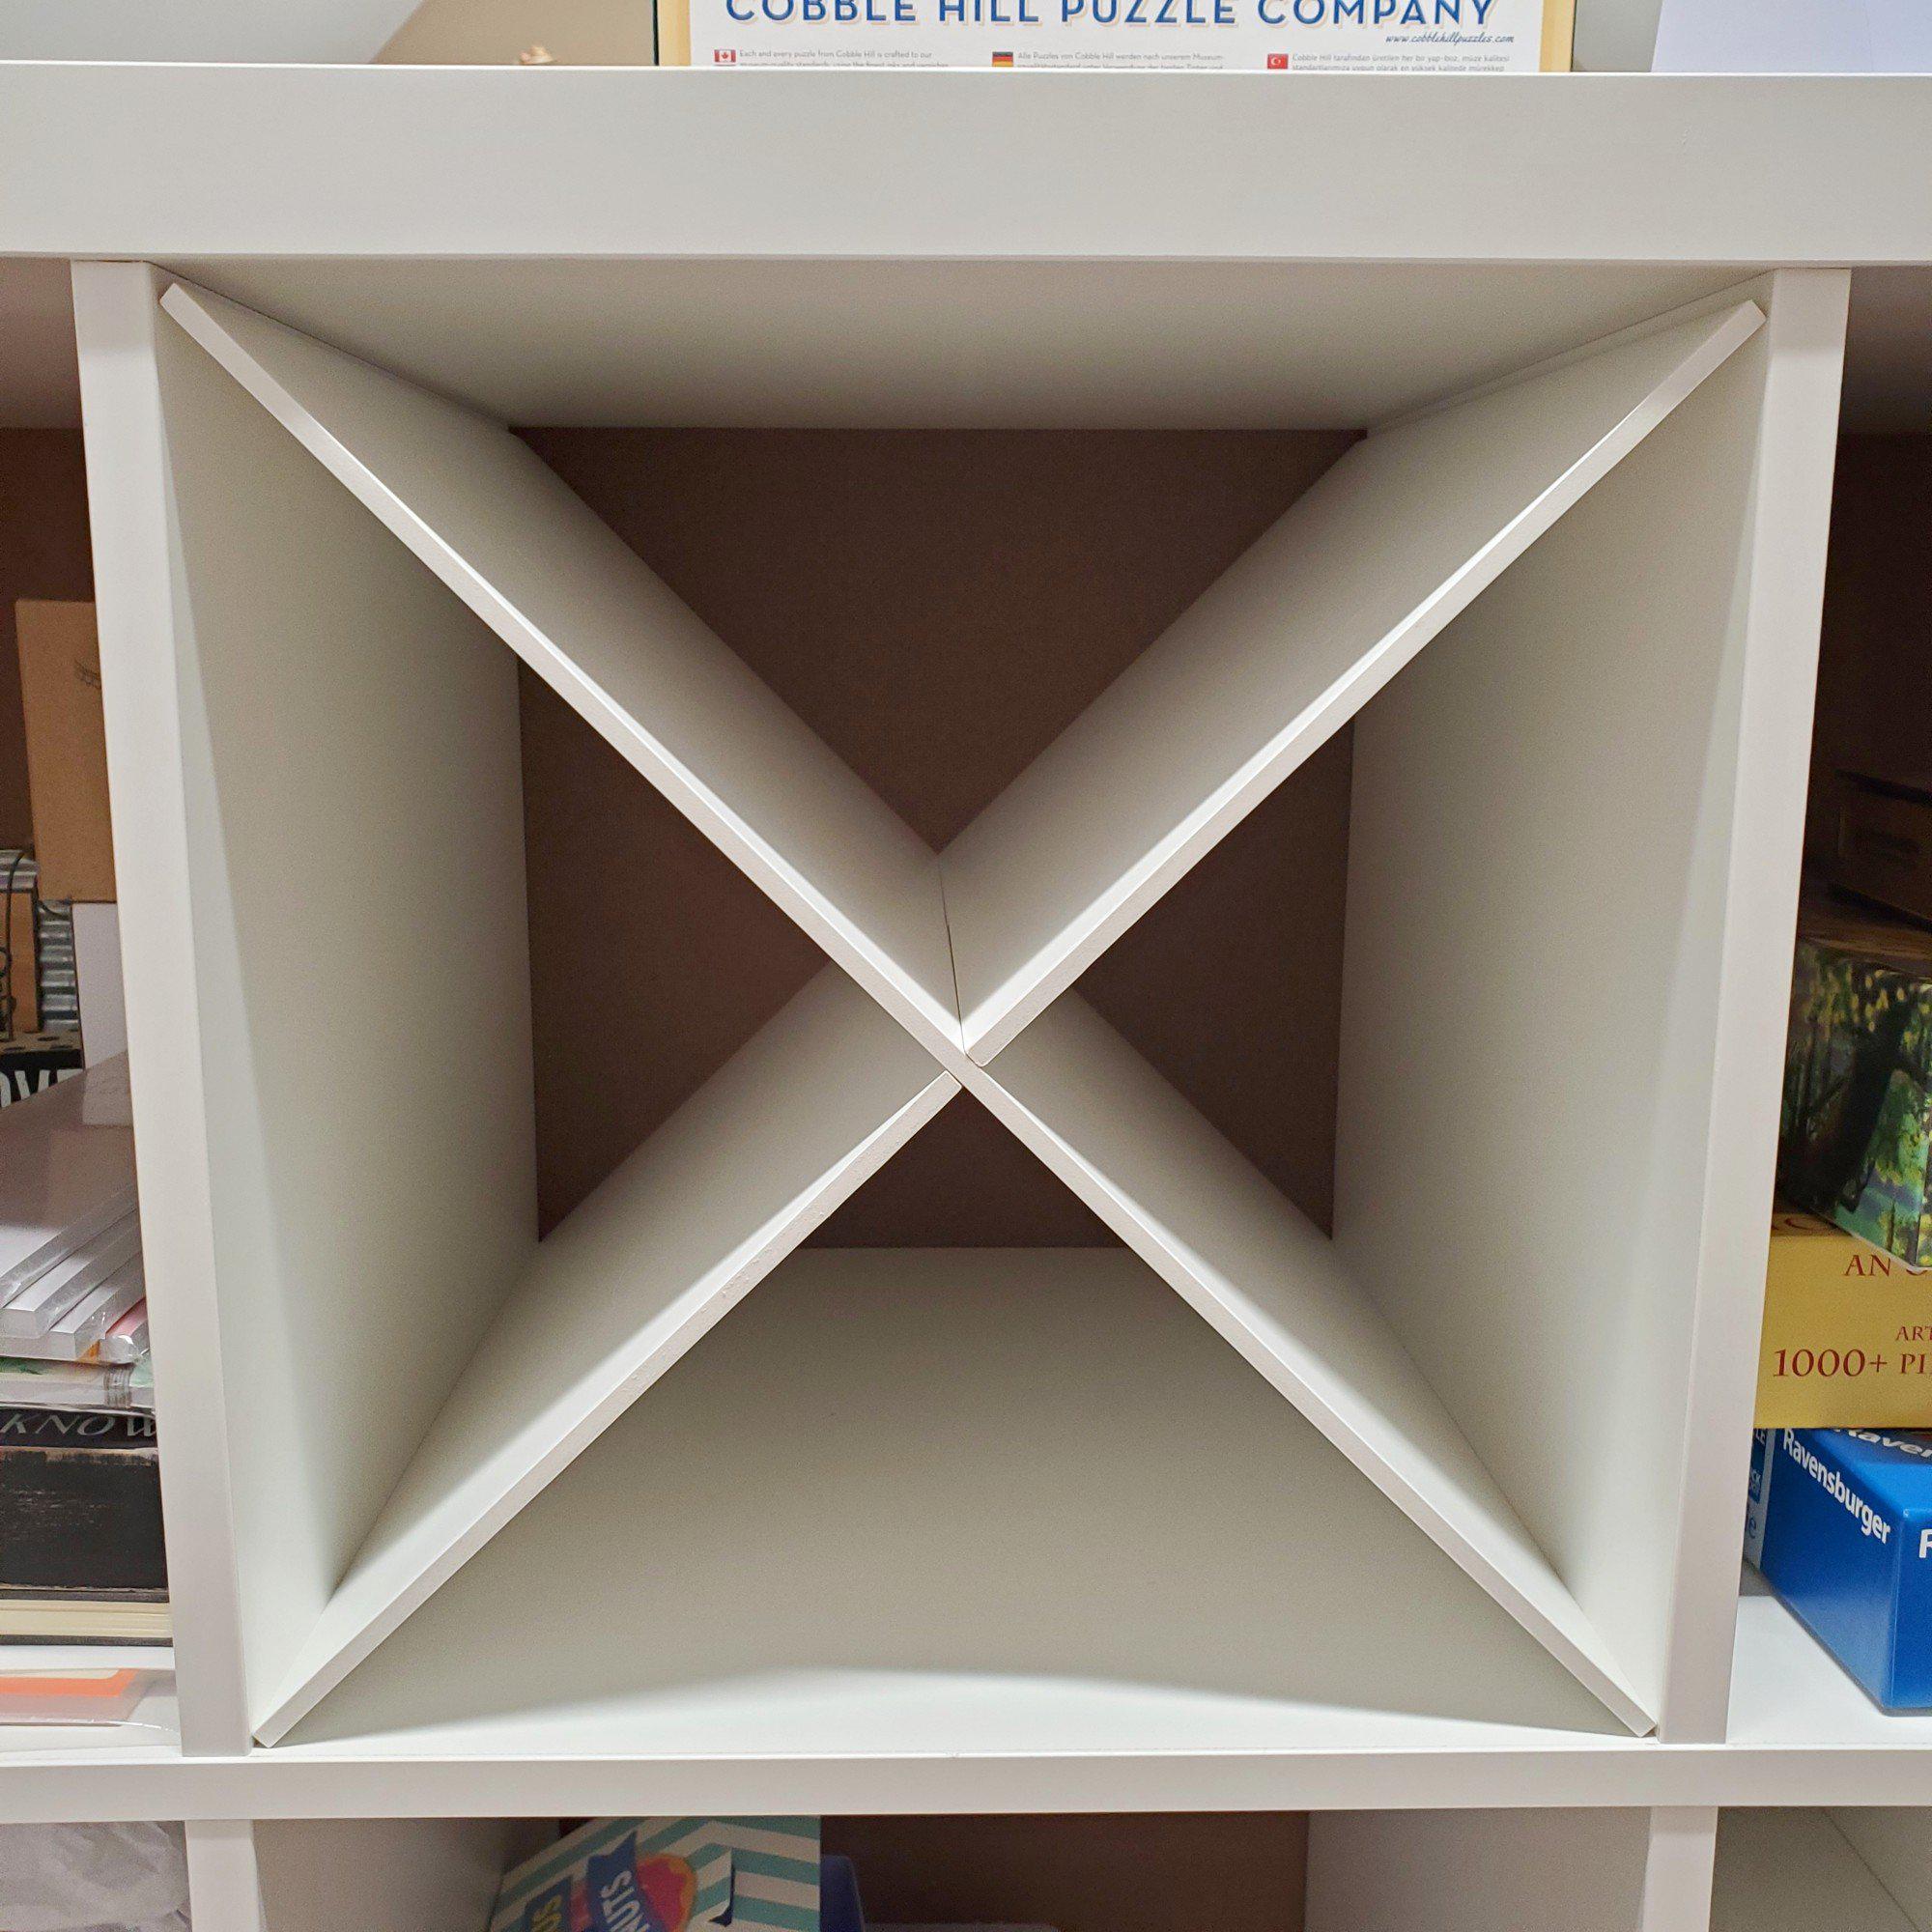 X Divider Cube Insert for Cube Storage Shelves, Unfinished or White-The Steady Hand